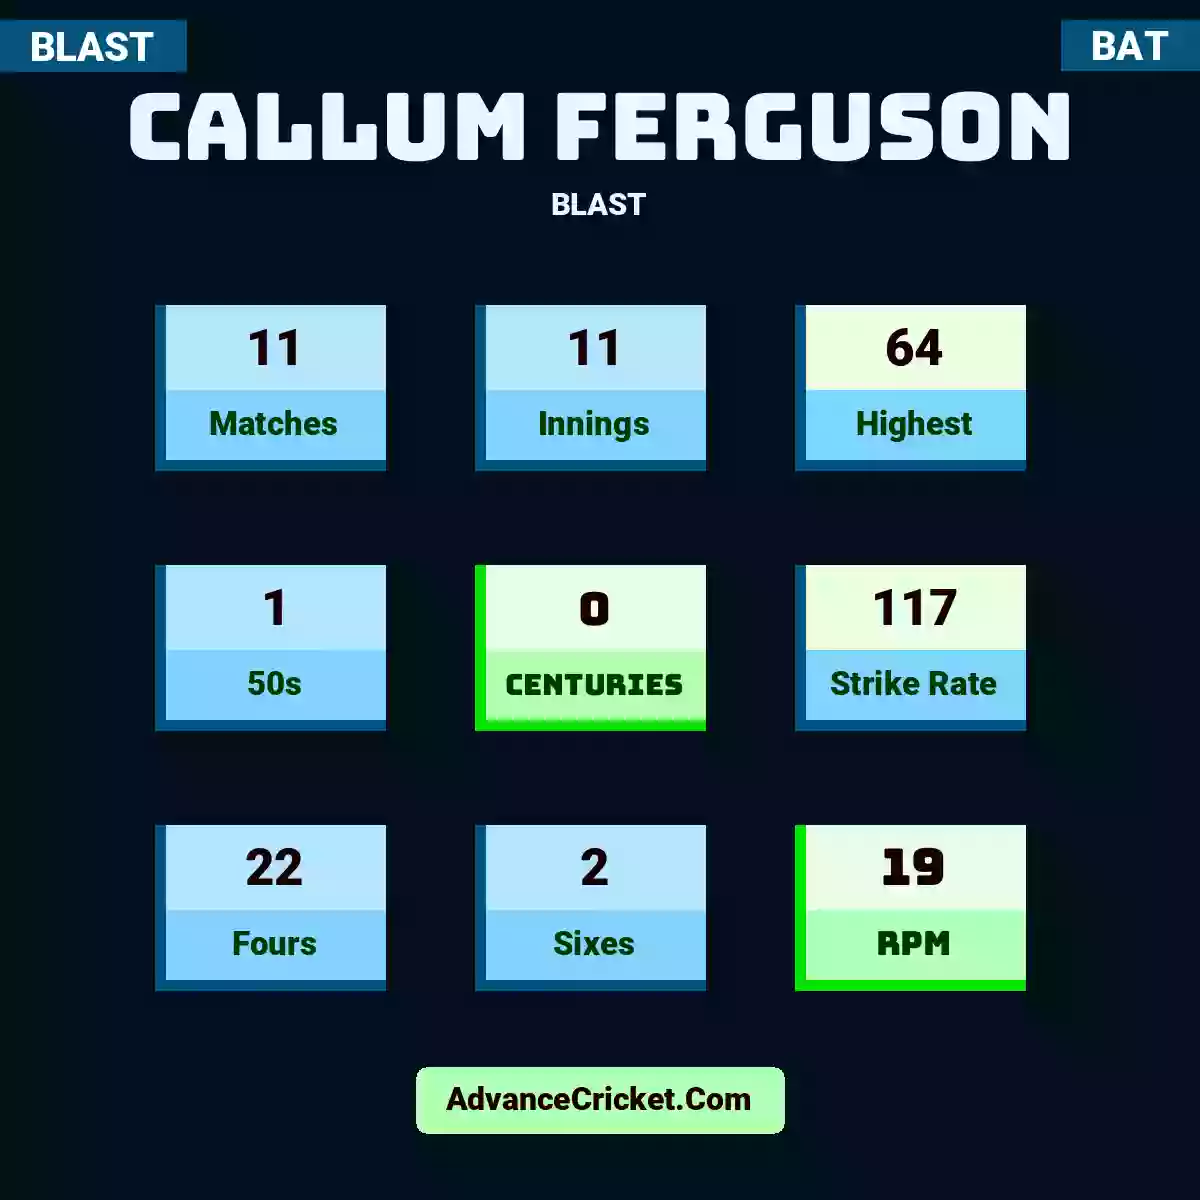 Callum Ferguson BLAST , Callum Ferguson played 11 matches, scored 64 runs as highest, 1 half-centuries, and 0 centuries, with a strike rate of 117. C.Ferguson hit 22 fours and 2 sixes, with an RPM of 19.